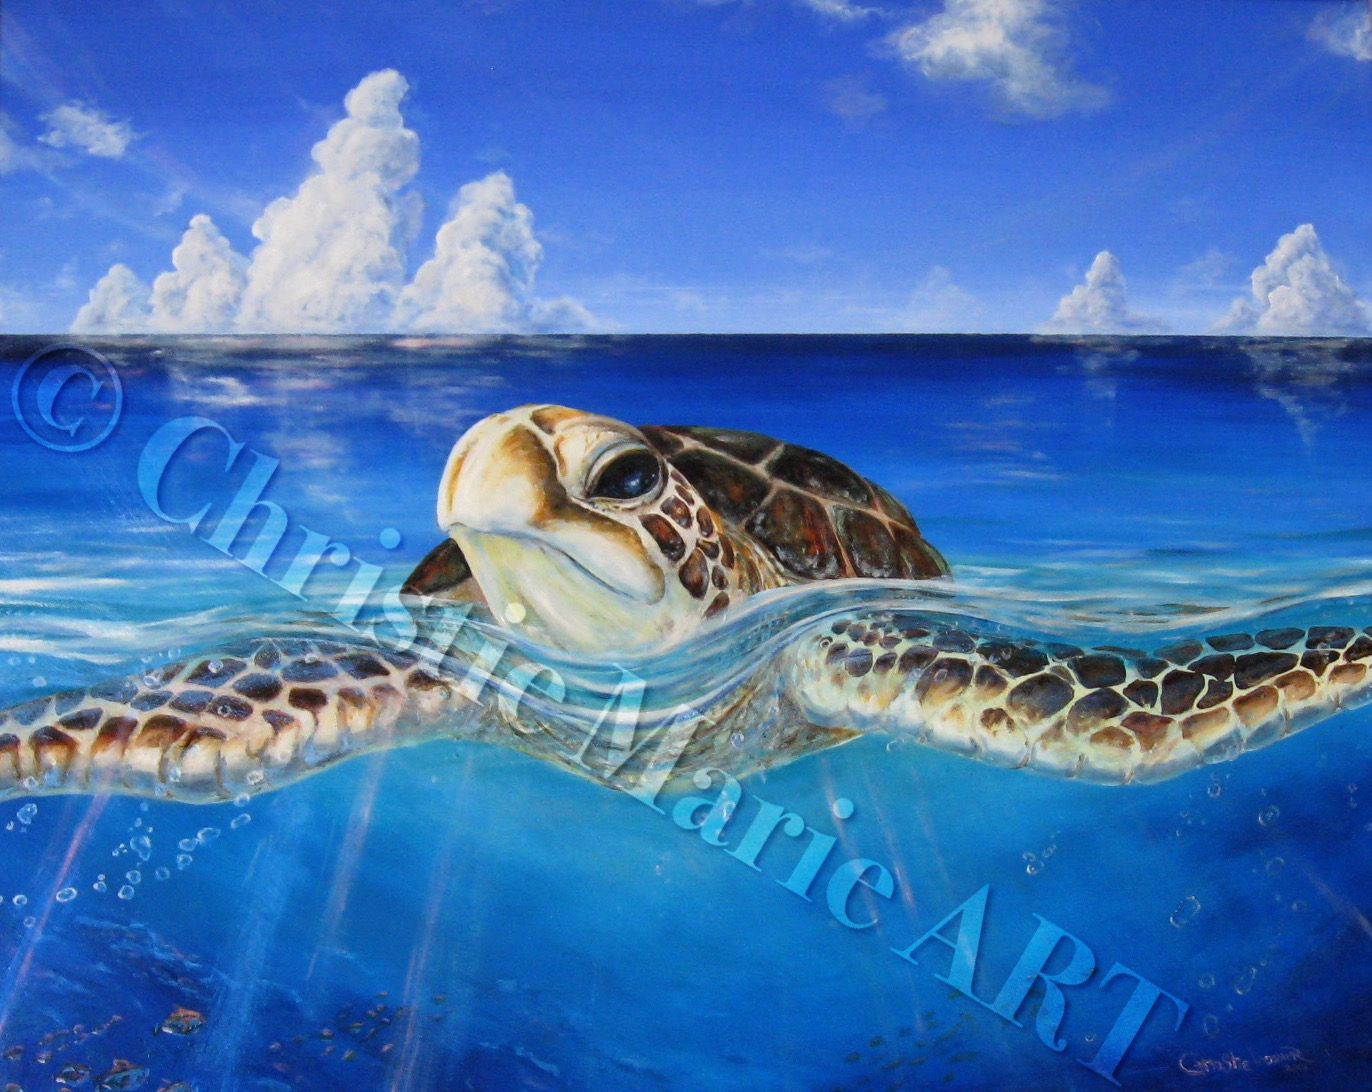 A Peace of the Tropics - Tropical Sea Turtle Art - Large ORIGINAL Oil Painting - Tropical Hawaiian Ocean Art by Christie Marie E Russell ©